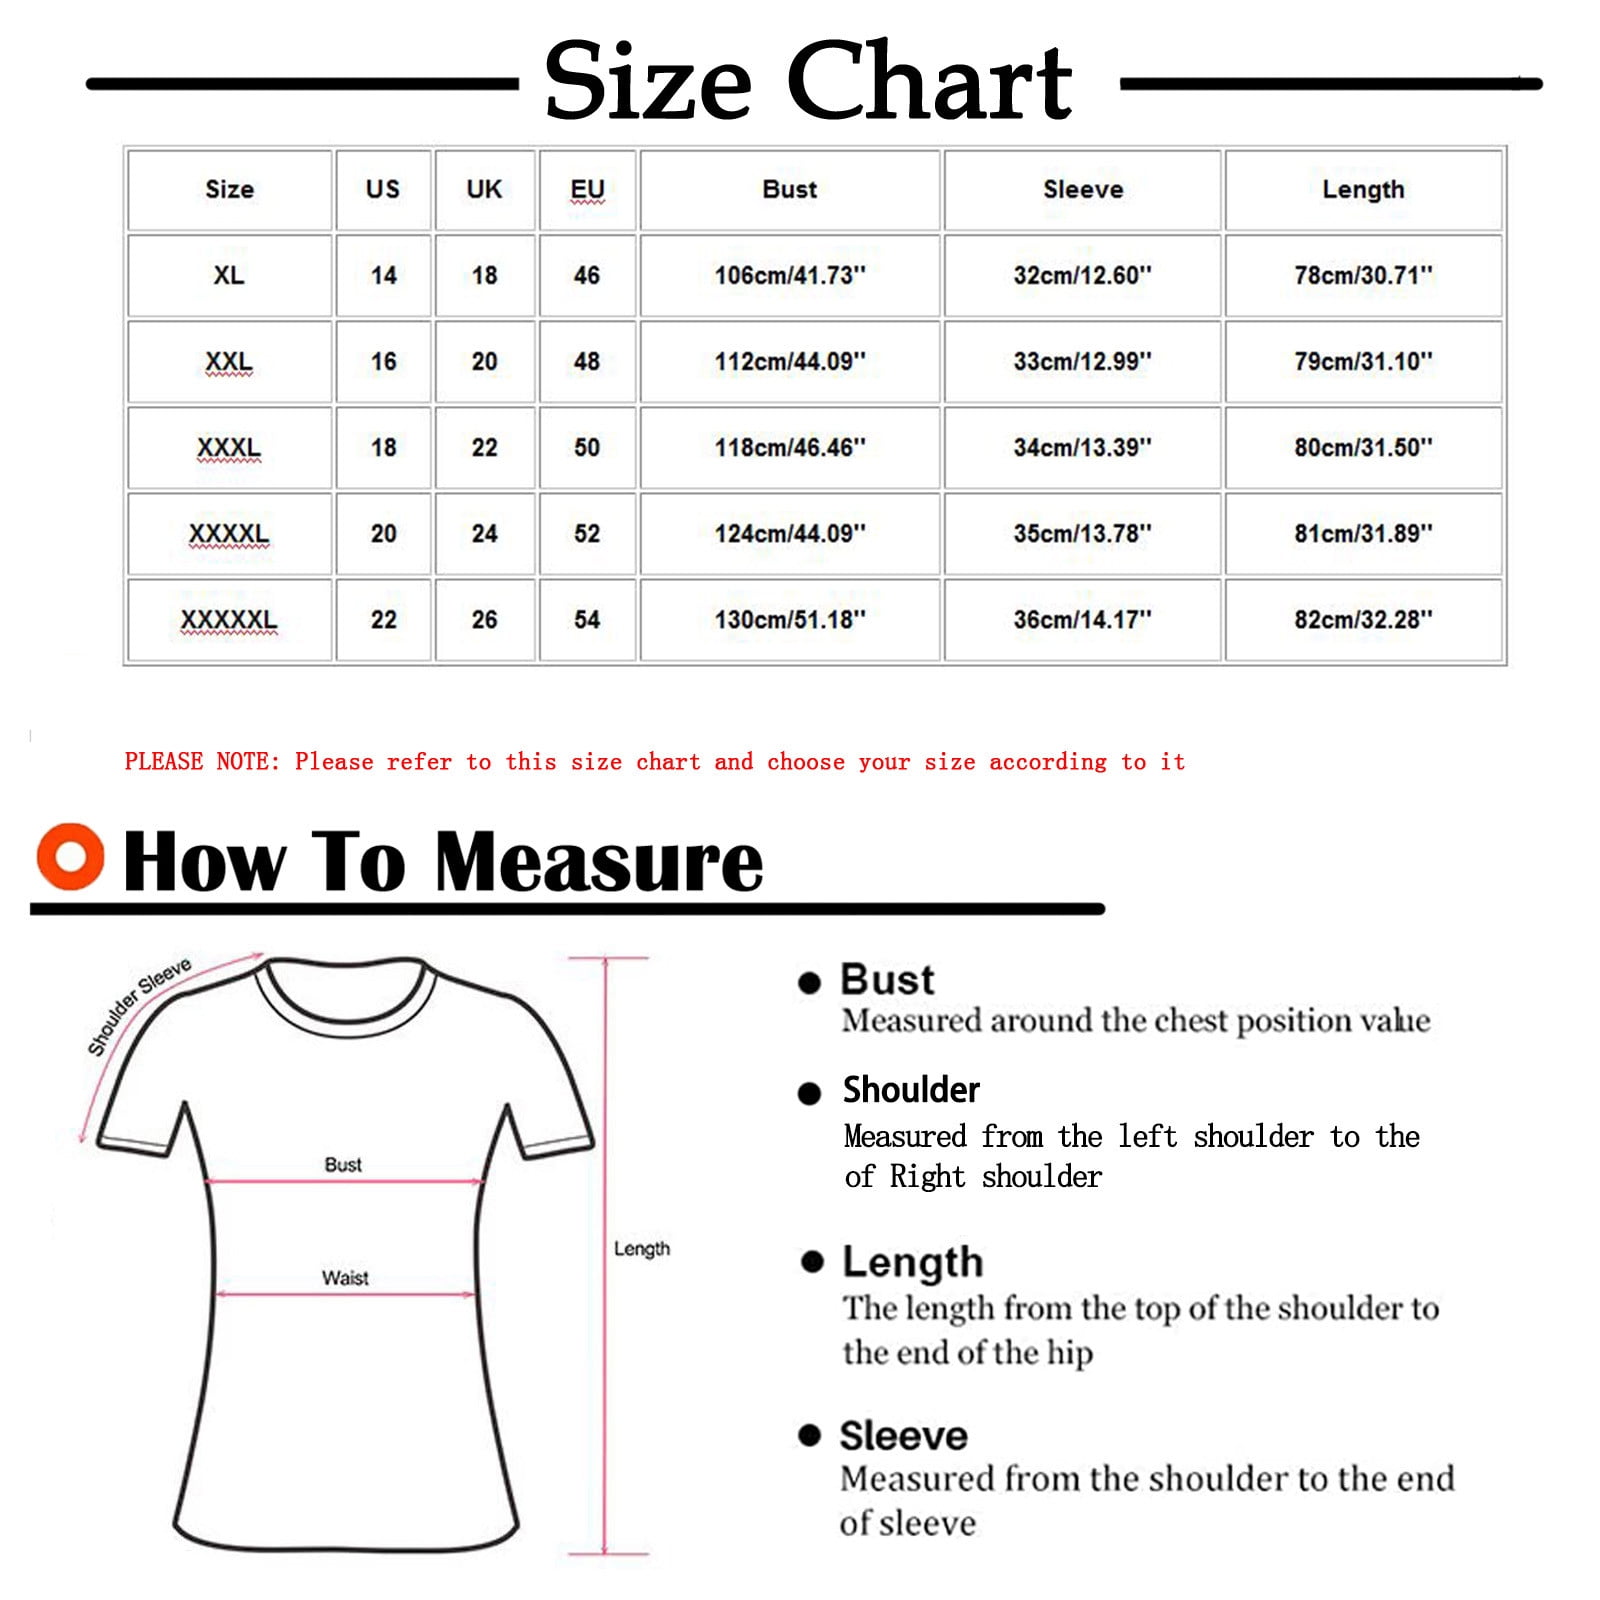 Casual T-Shirts Tops V-Neck Womens,1 dolar,Sport Clothing for Women Pluse  Size,Women's Cold Shoulder Short Sleeve Solid Color t-Shirt,Womens t Shirts,1.00  Dollar Items,Womens Loose Shirts A-Black at  Women's Clothing store